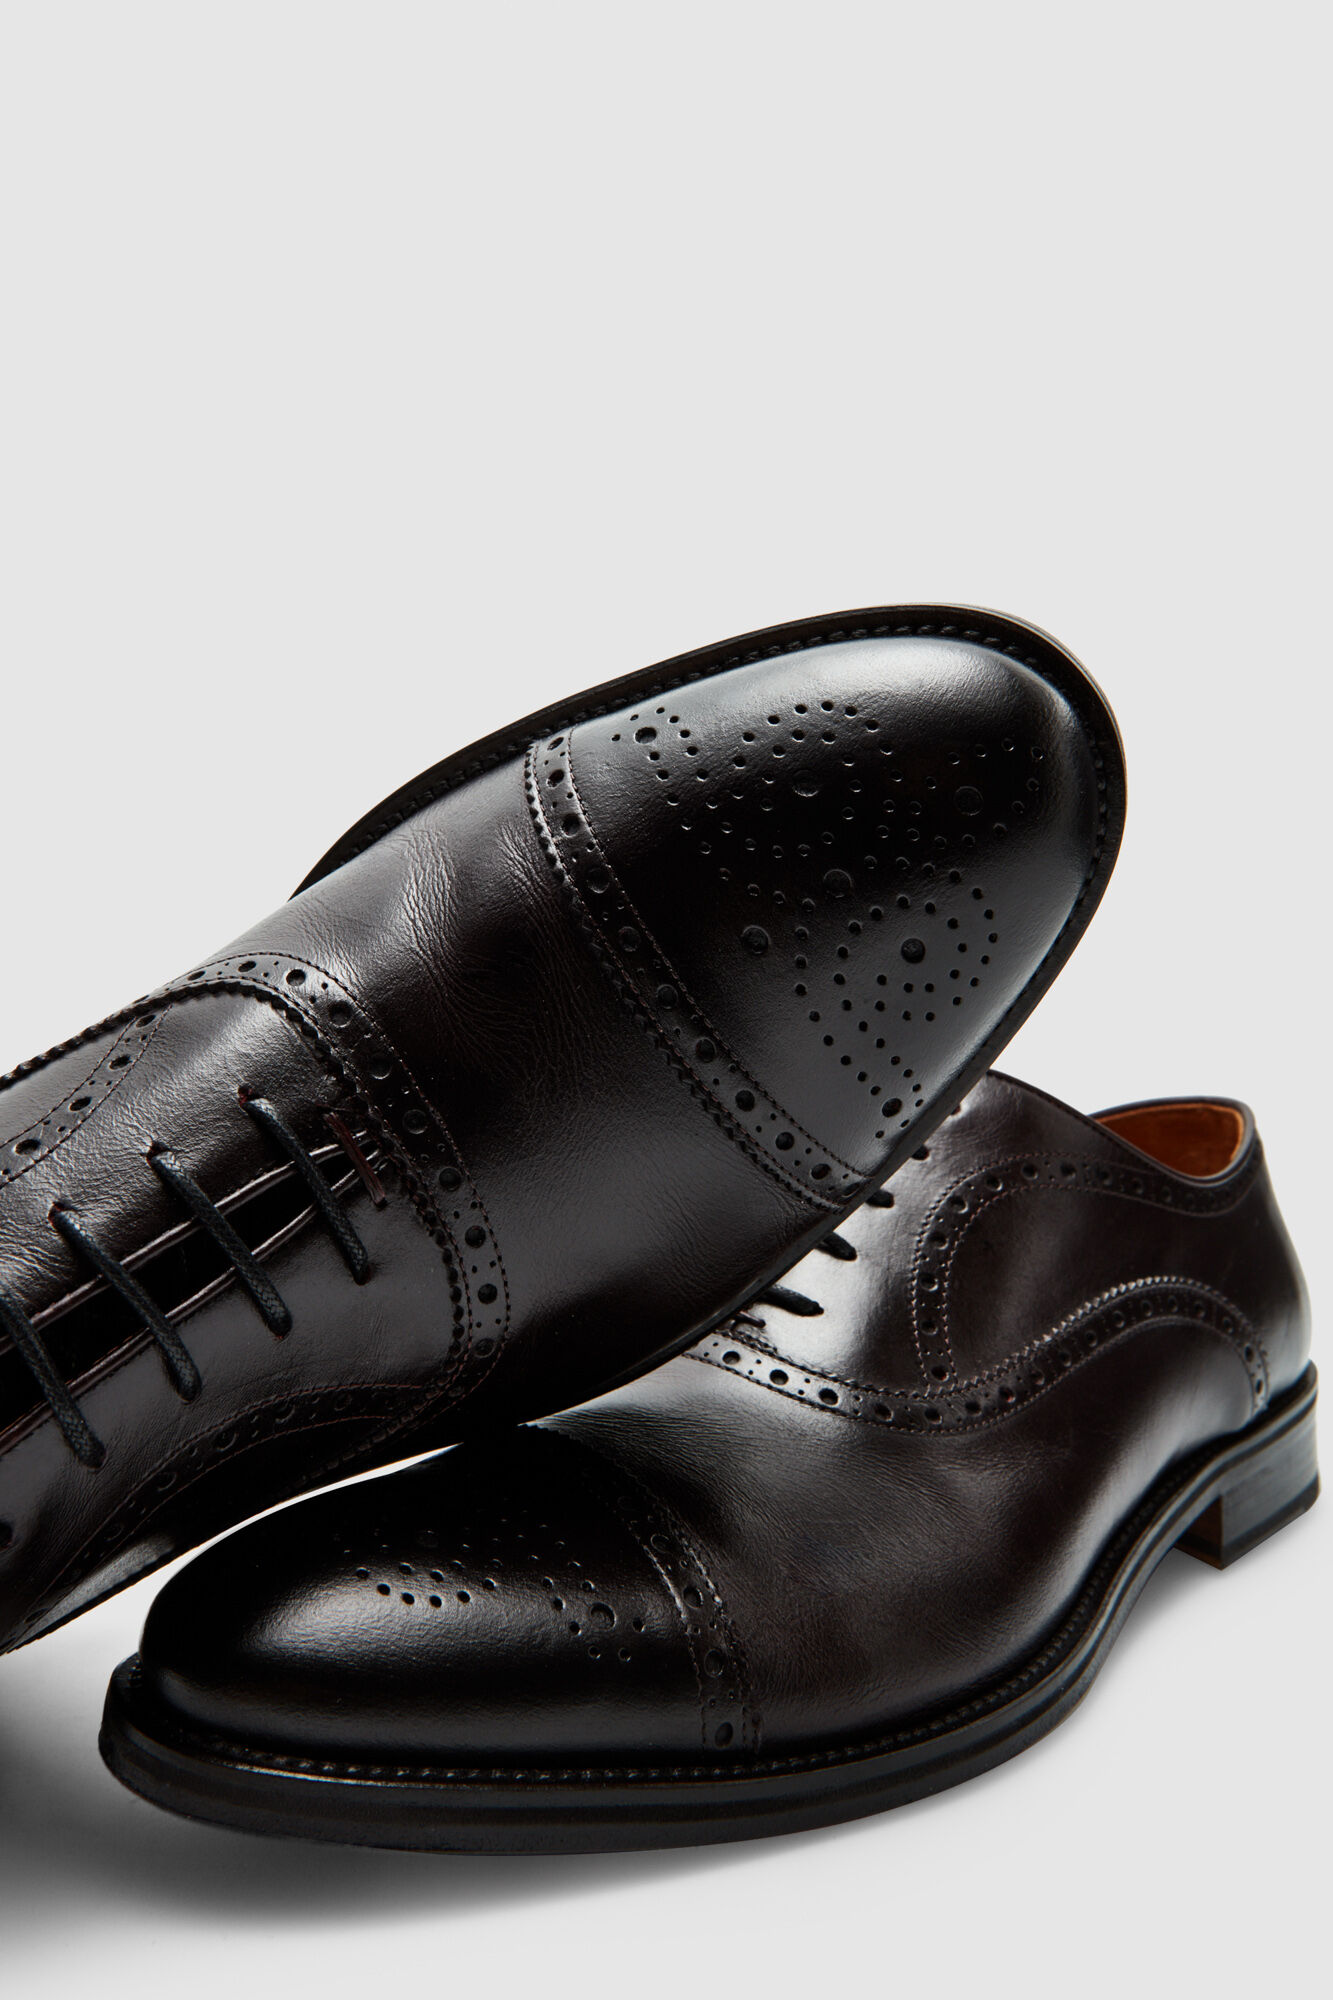 perforated dress shoes